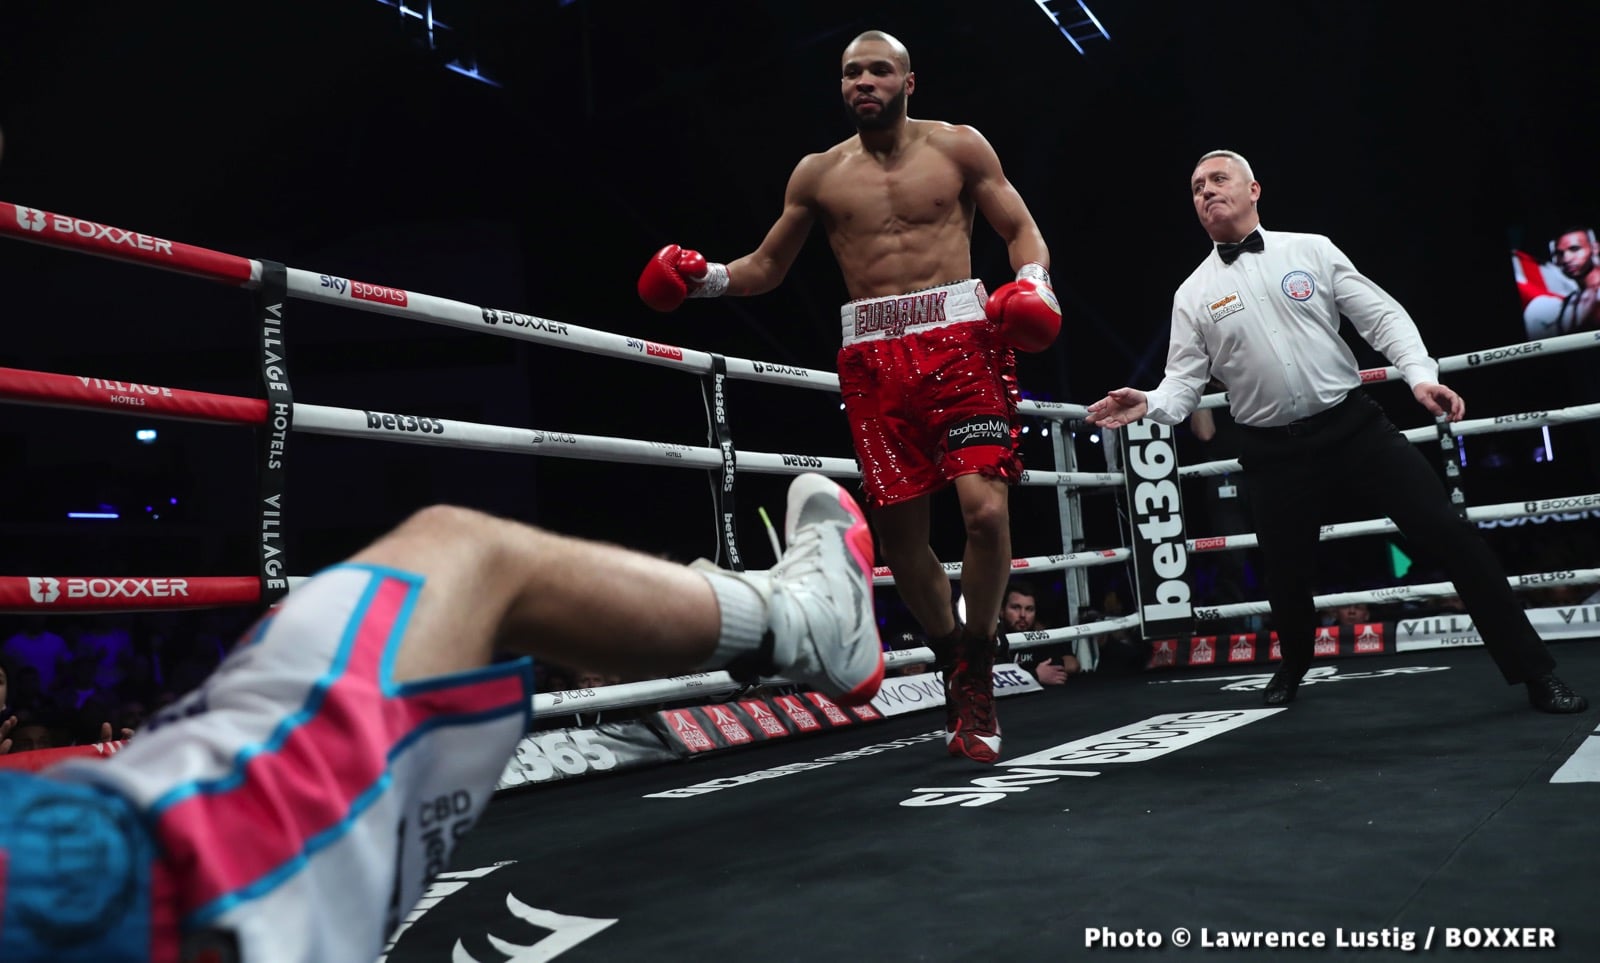 Eubank Jr. vs. Williams - Live action results from Cardiff